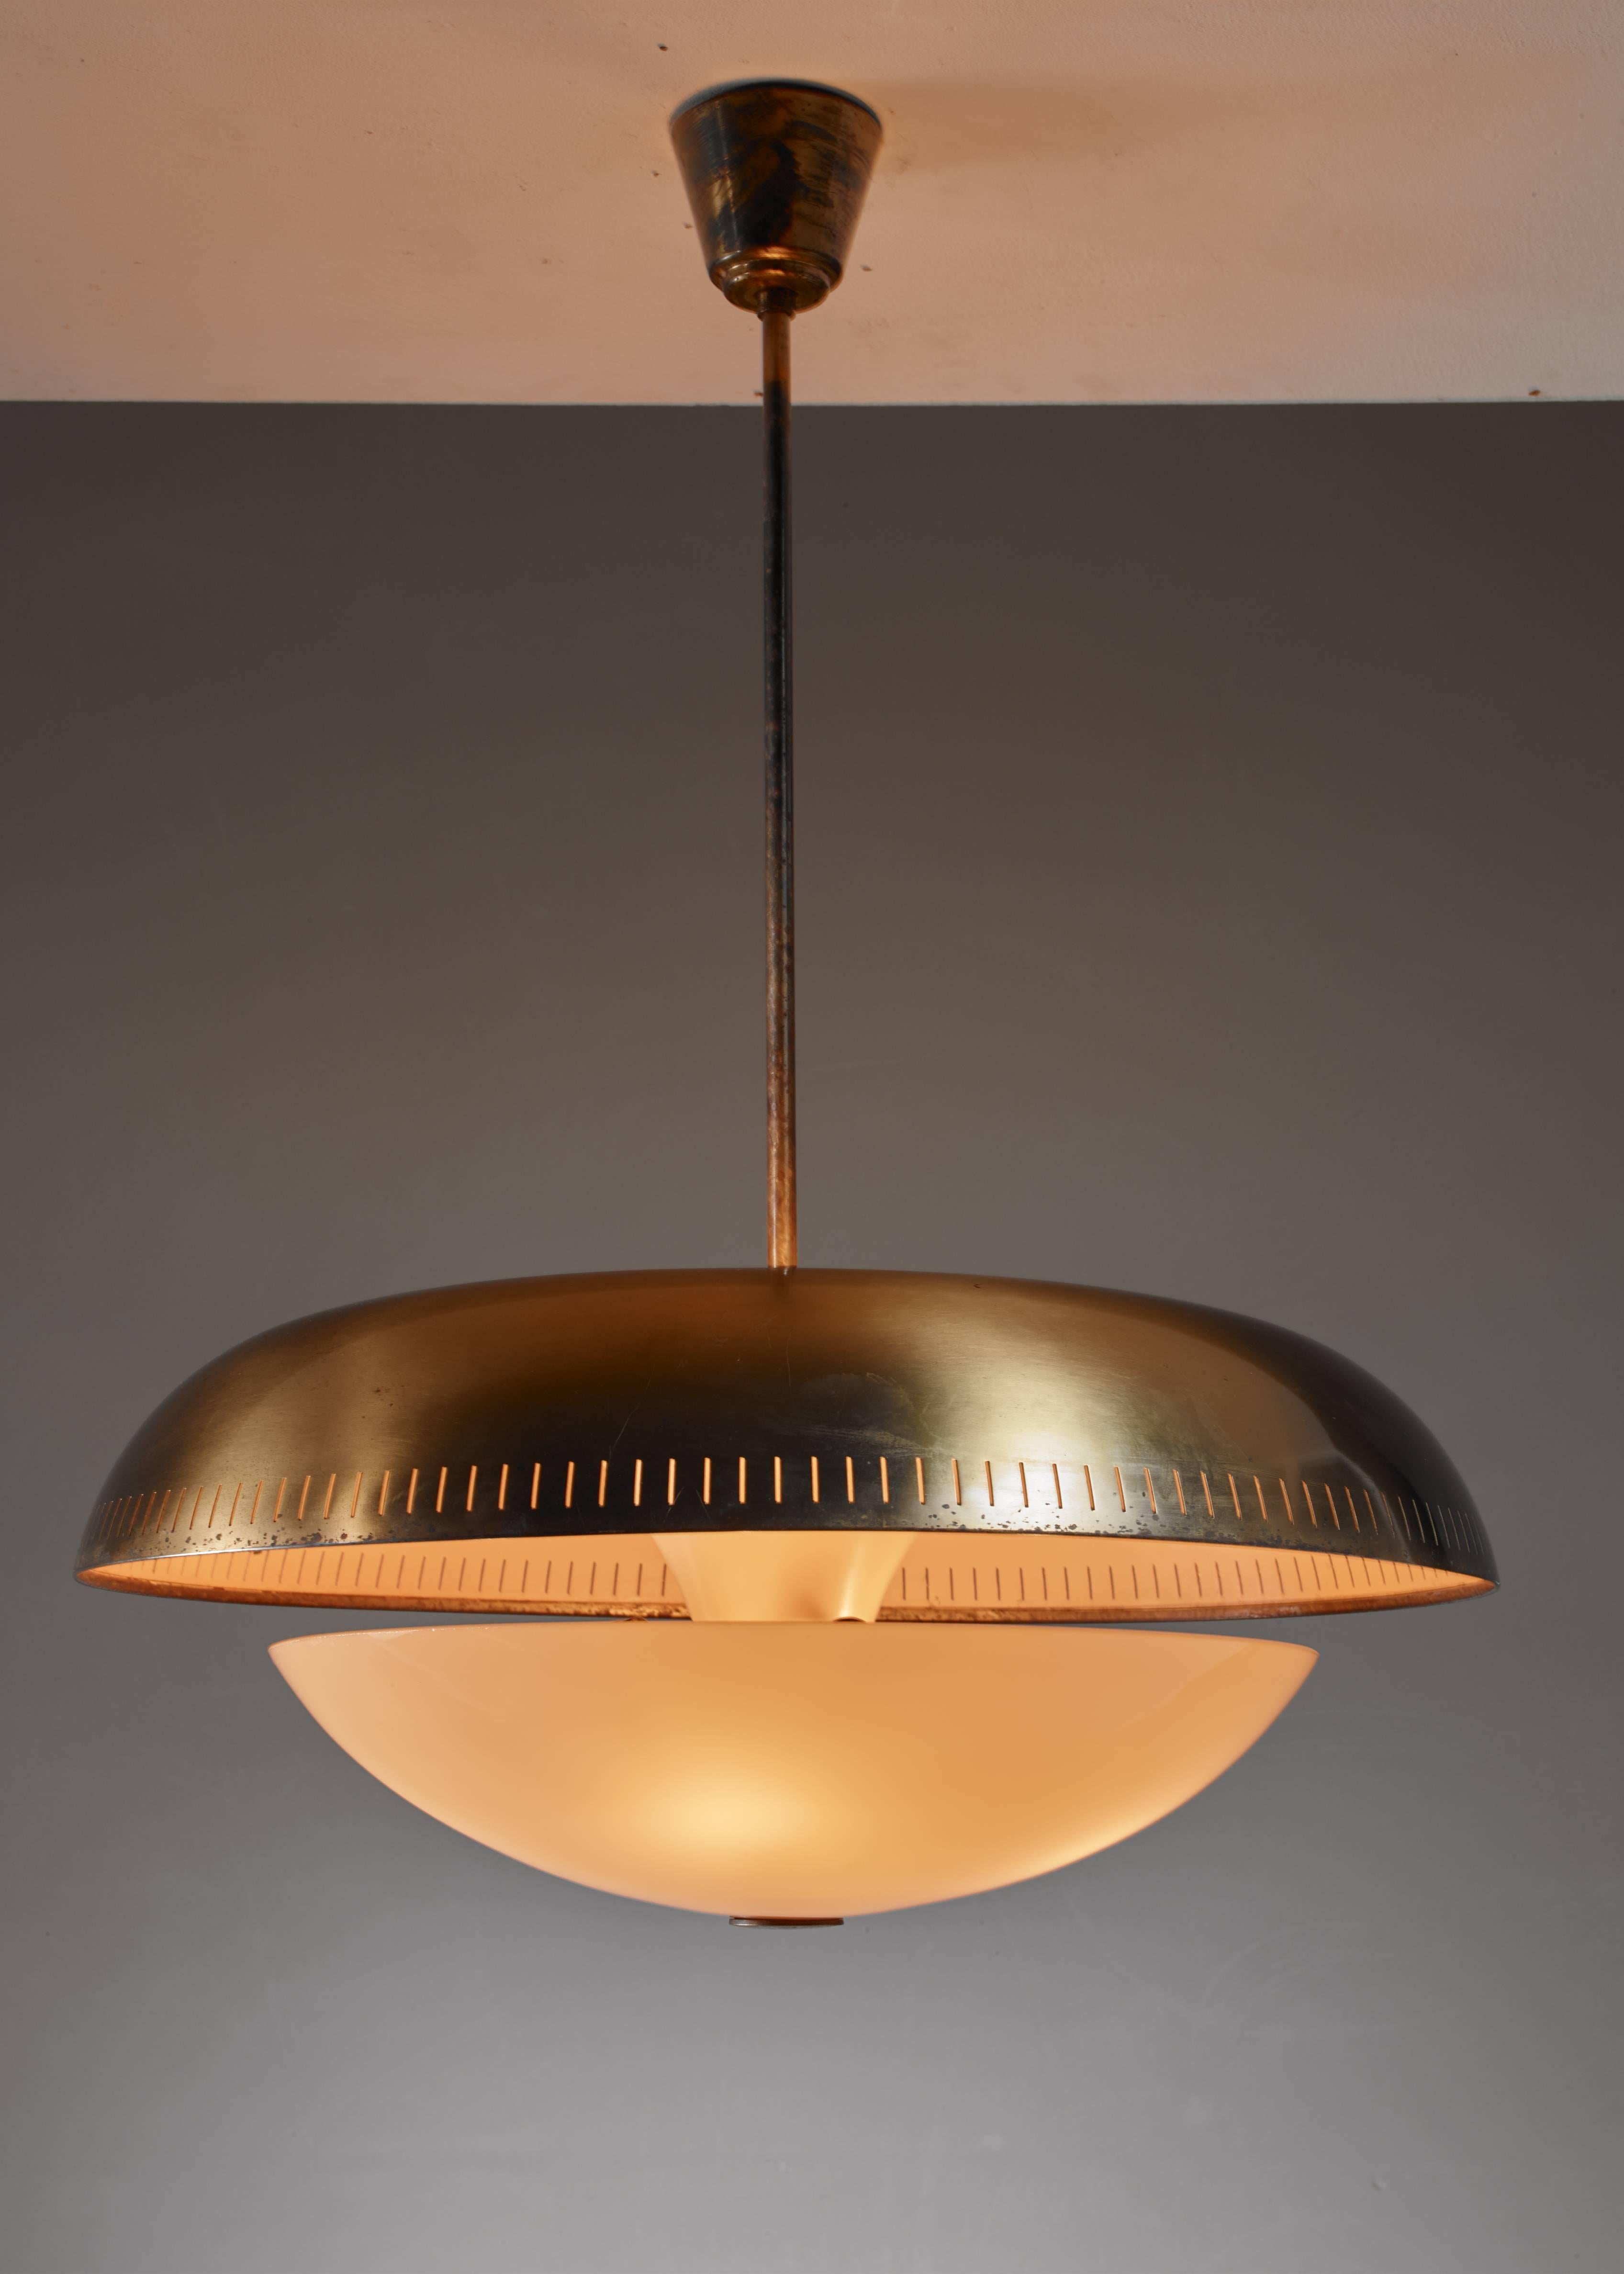 A Harald Notini pendant lamp for Bohlmarks, made of a perforated brass shade with a yellow glass diffuser underneath. The combination of the yellow of the inside of the shade and the diffuser gives a beautiful warm light. The lamp has four light